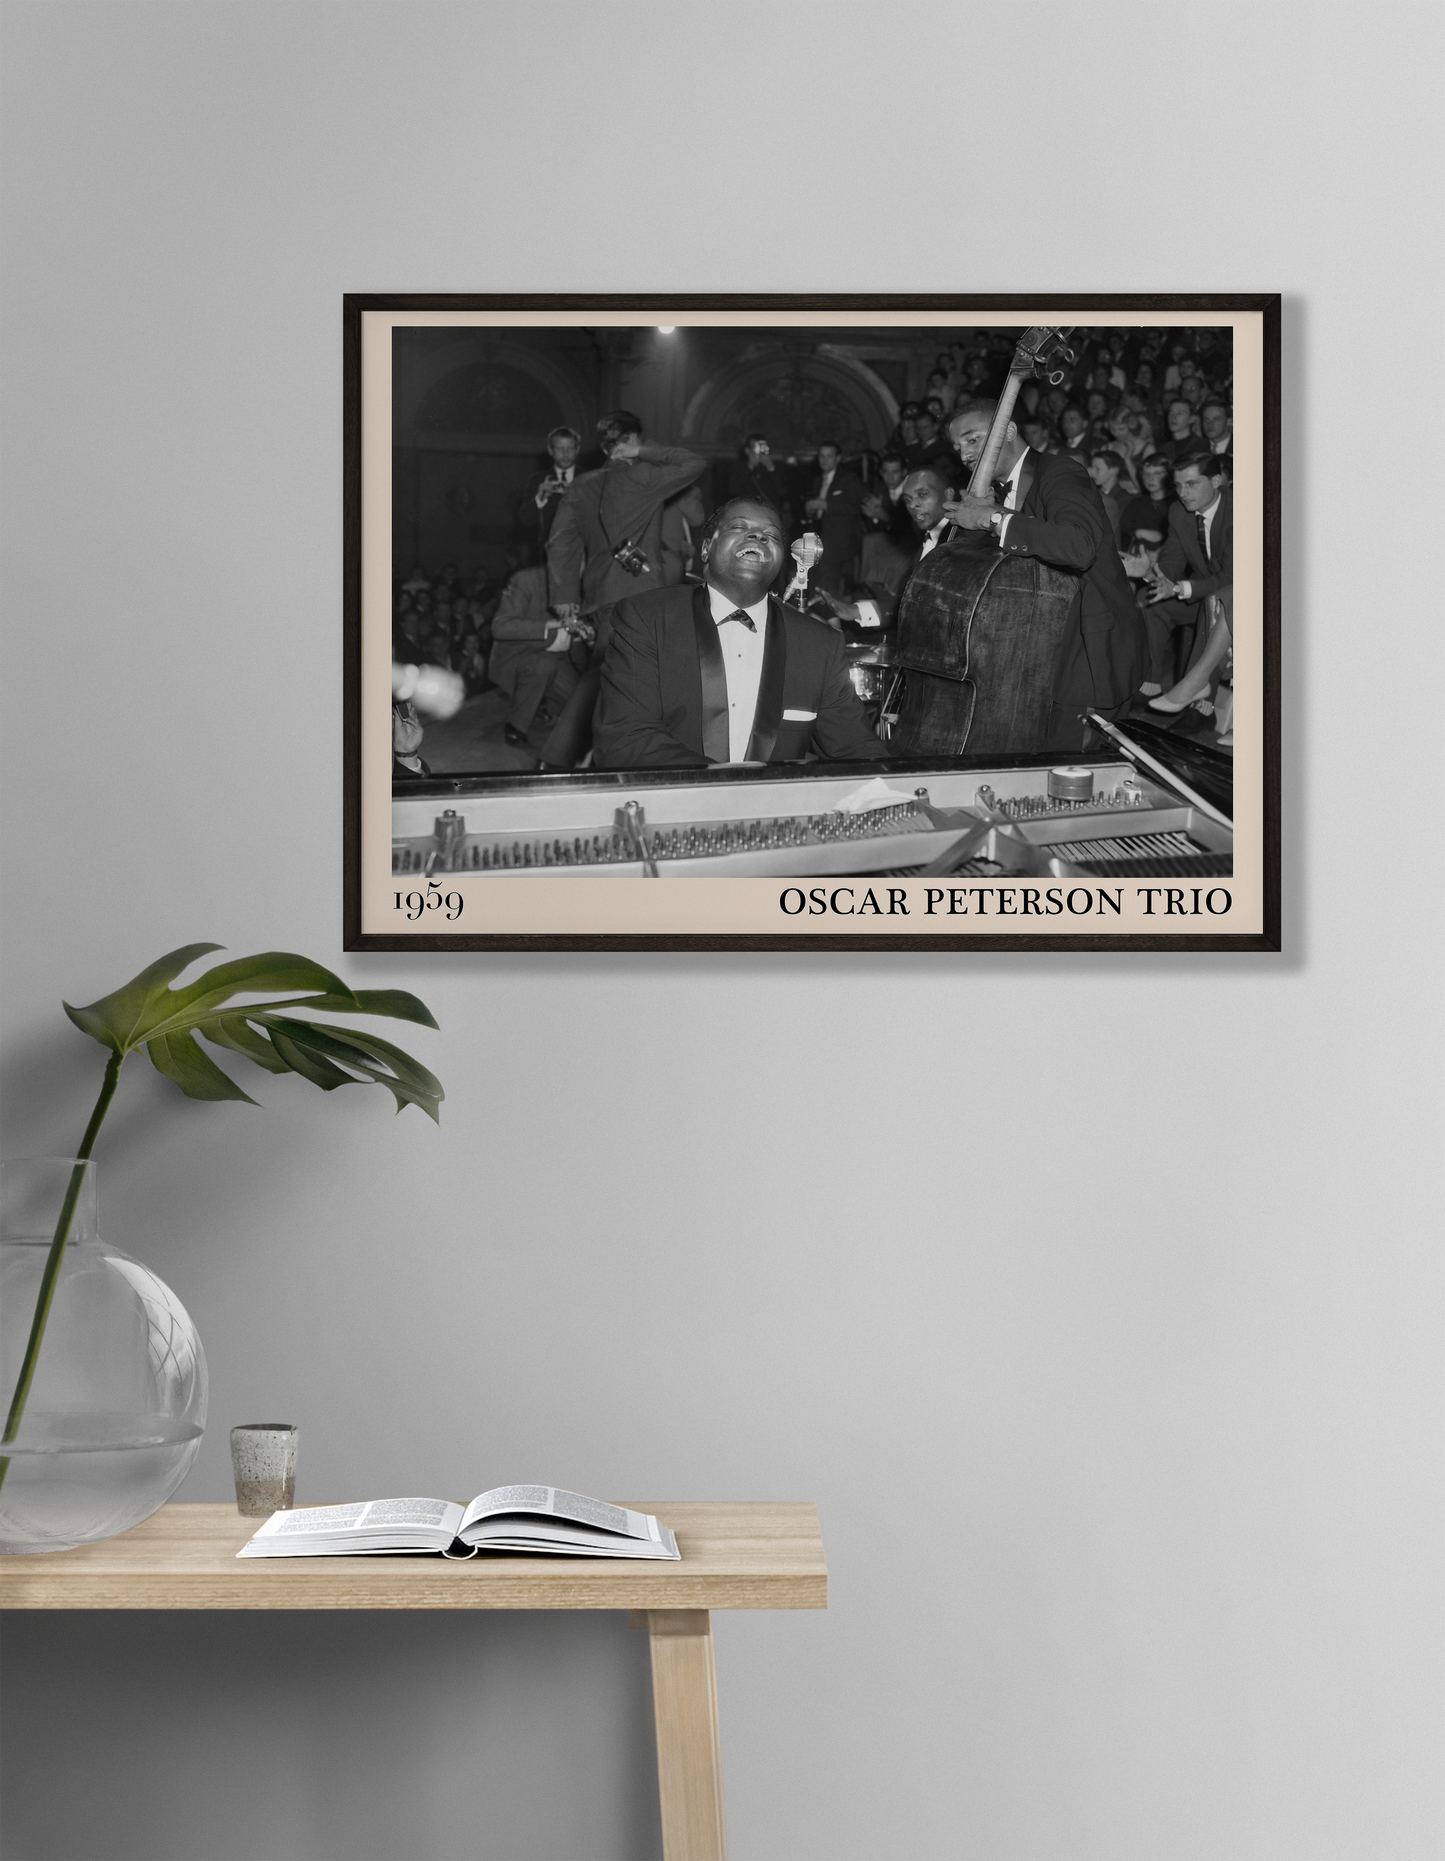 1959 picture of the Oscar Peterson Trio. Picture crafted into a cool black framed jazz print, with an off-white border. Poster is hanging on a grey living room wall